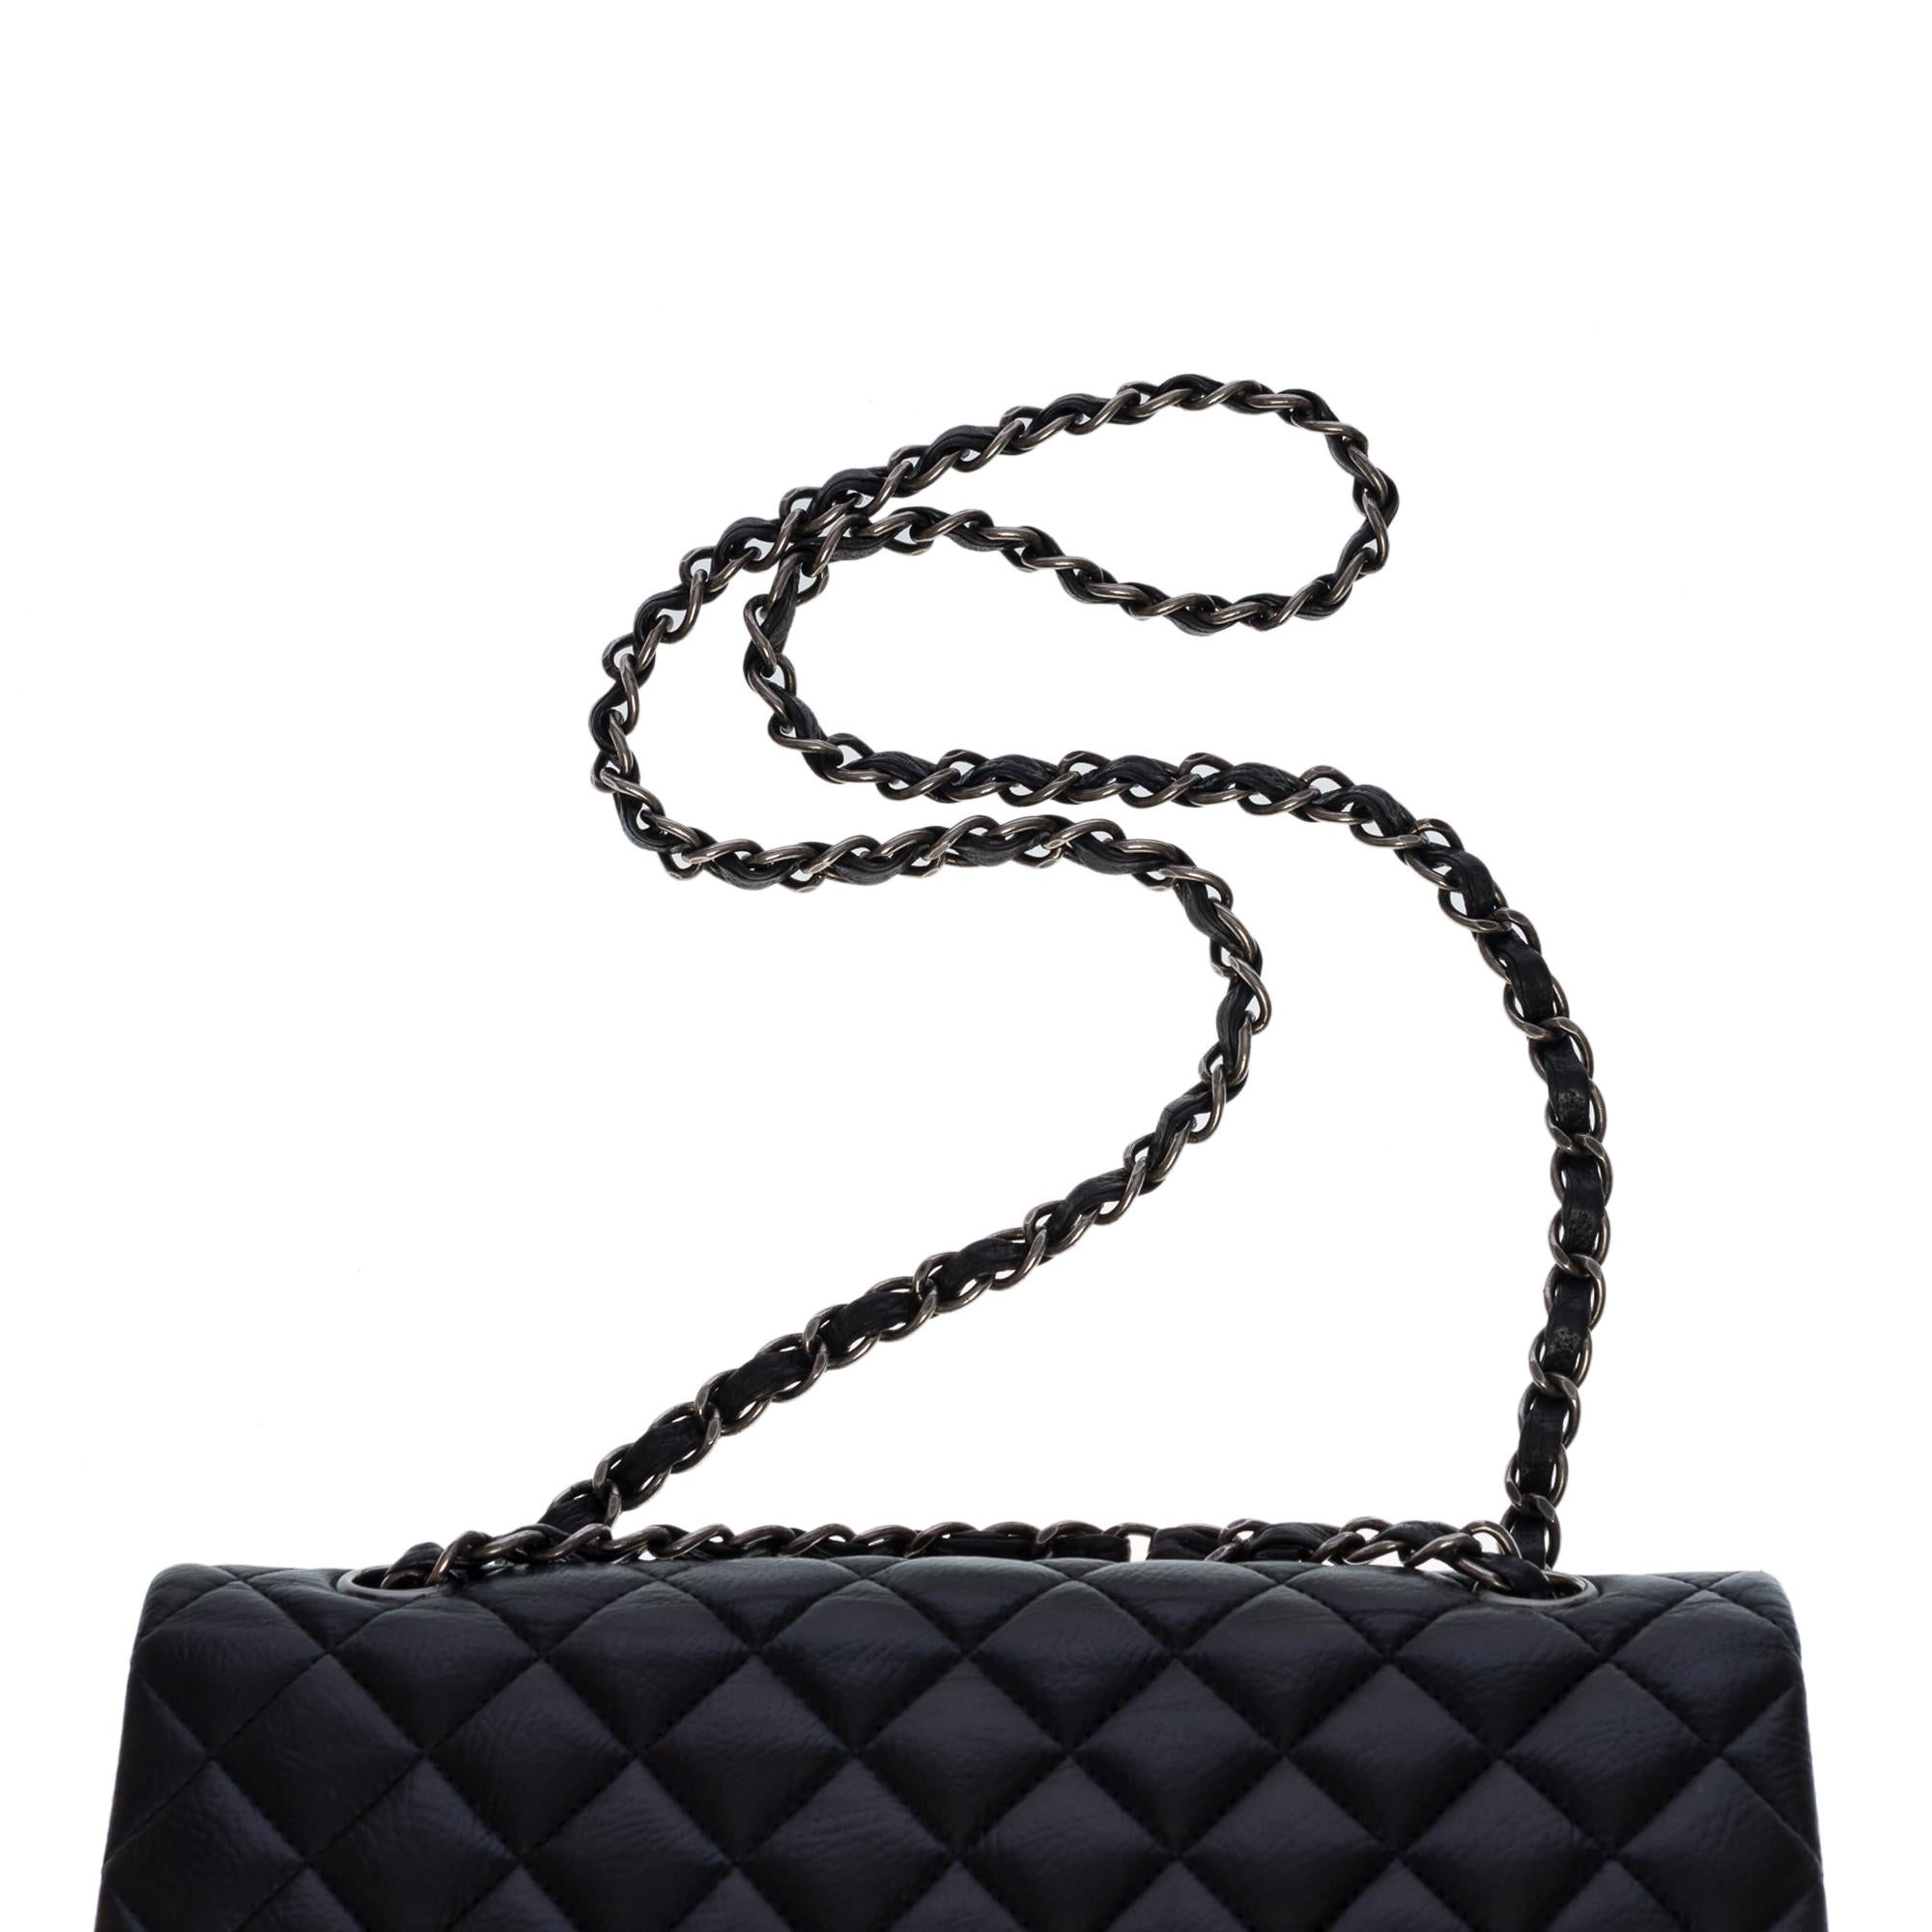 Chanel Timeless medium 25cm limited edition in black leather, SHW 4